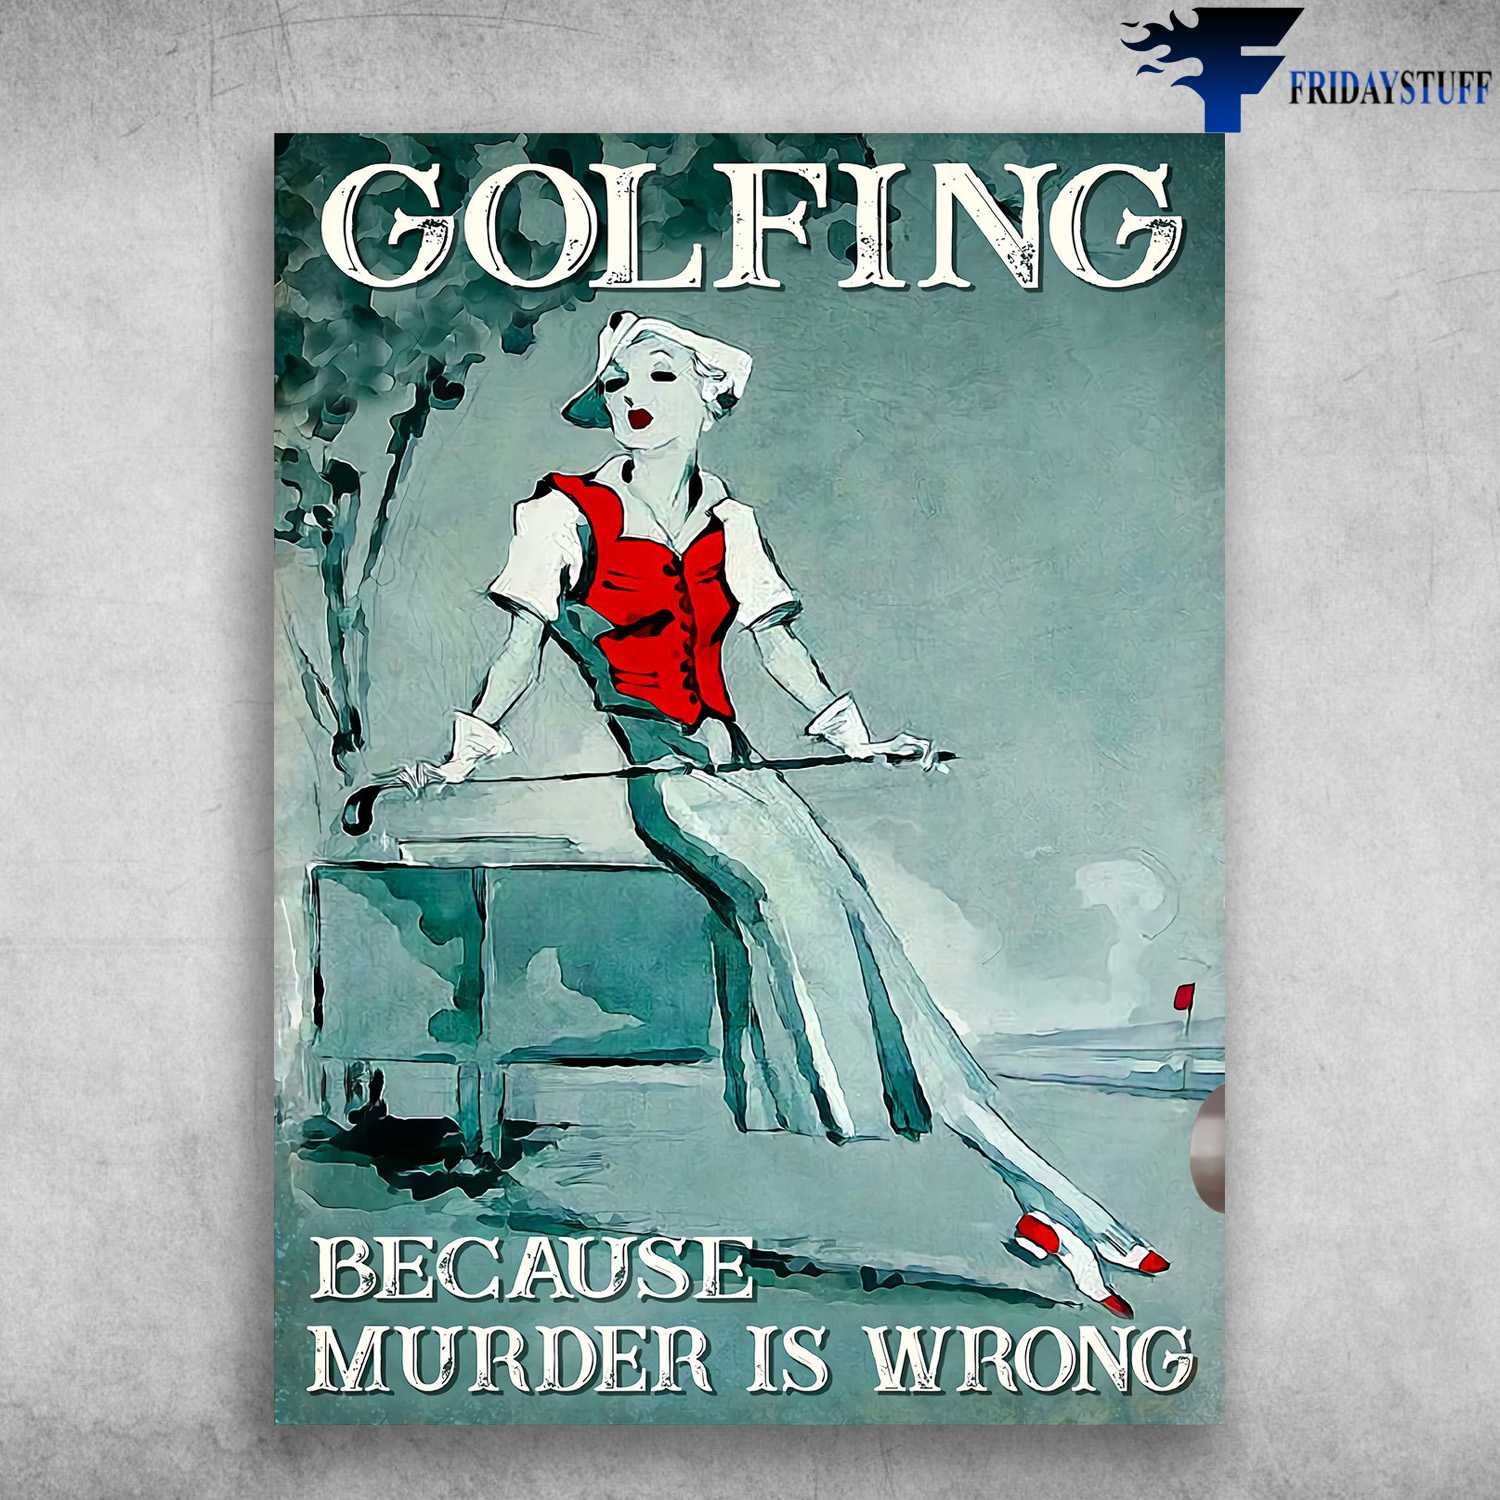 Golfing Poster, Lady Plays Golf - Golf Because Murder Is Wrong